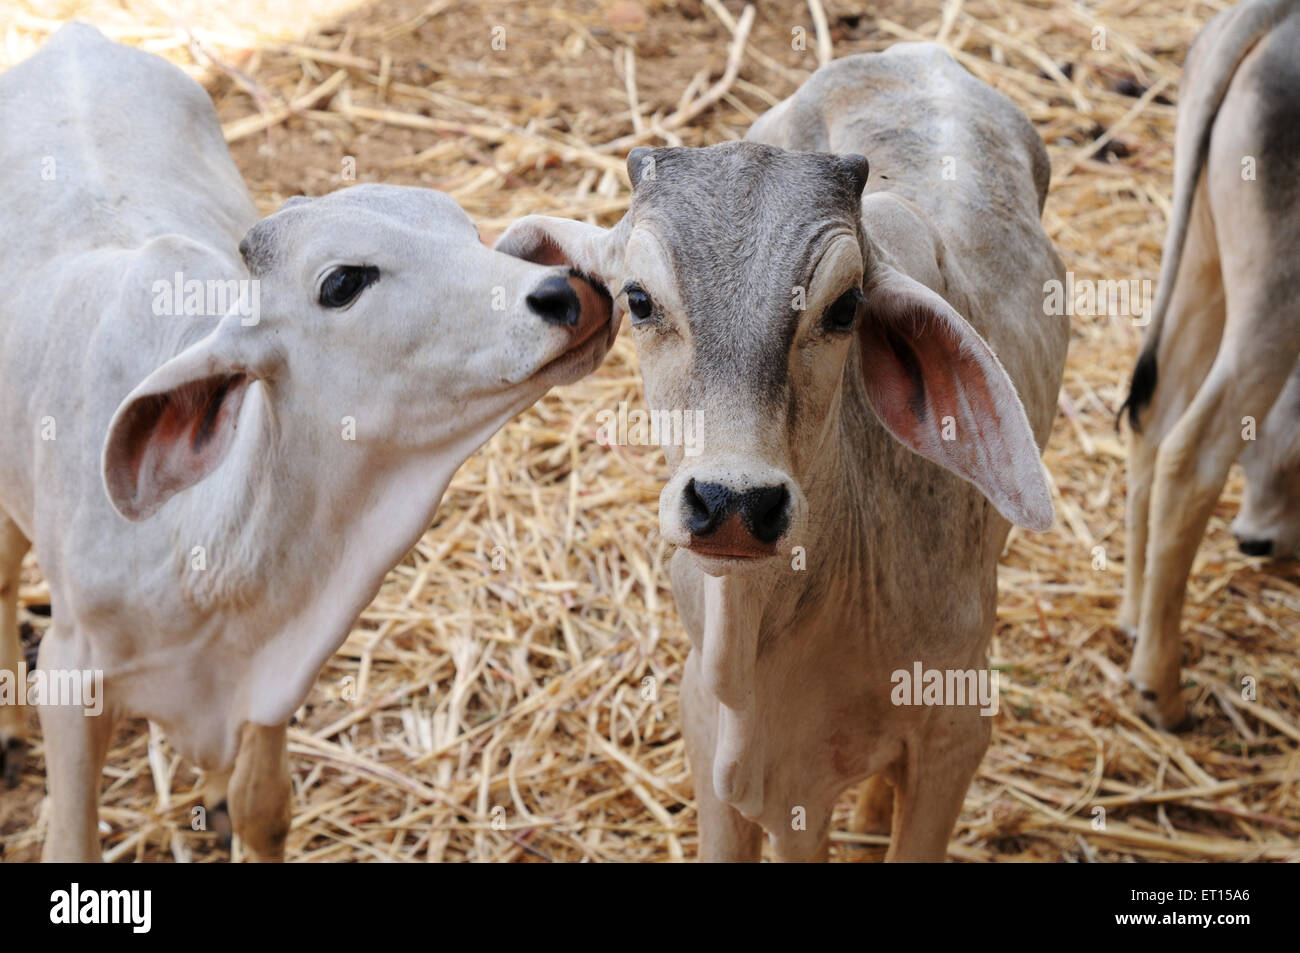 Cows in cow shelter, herd of cows, Bhuj, Kutch, Gujarat, India Stock Photo